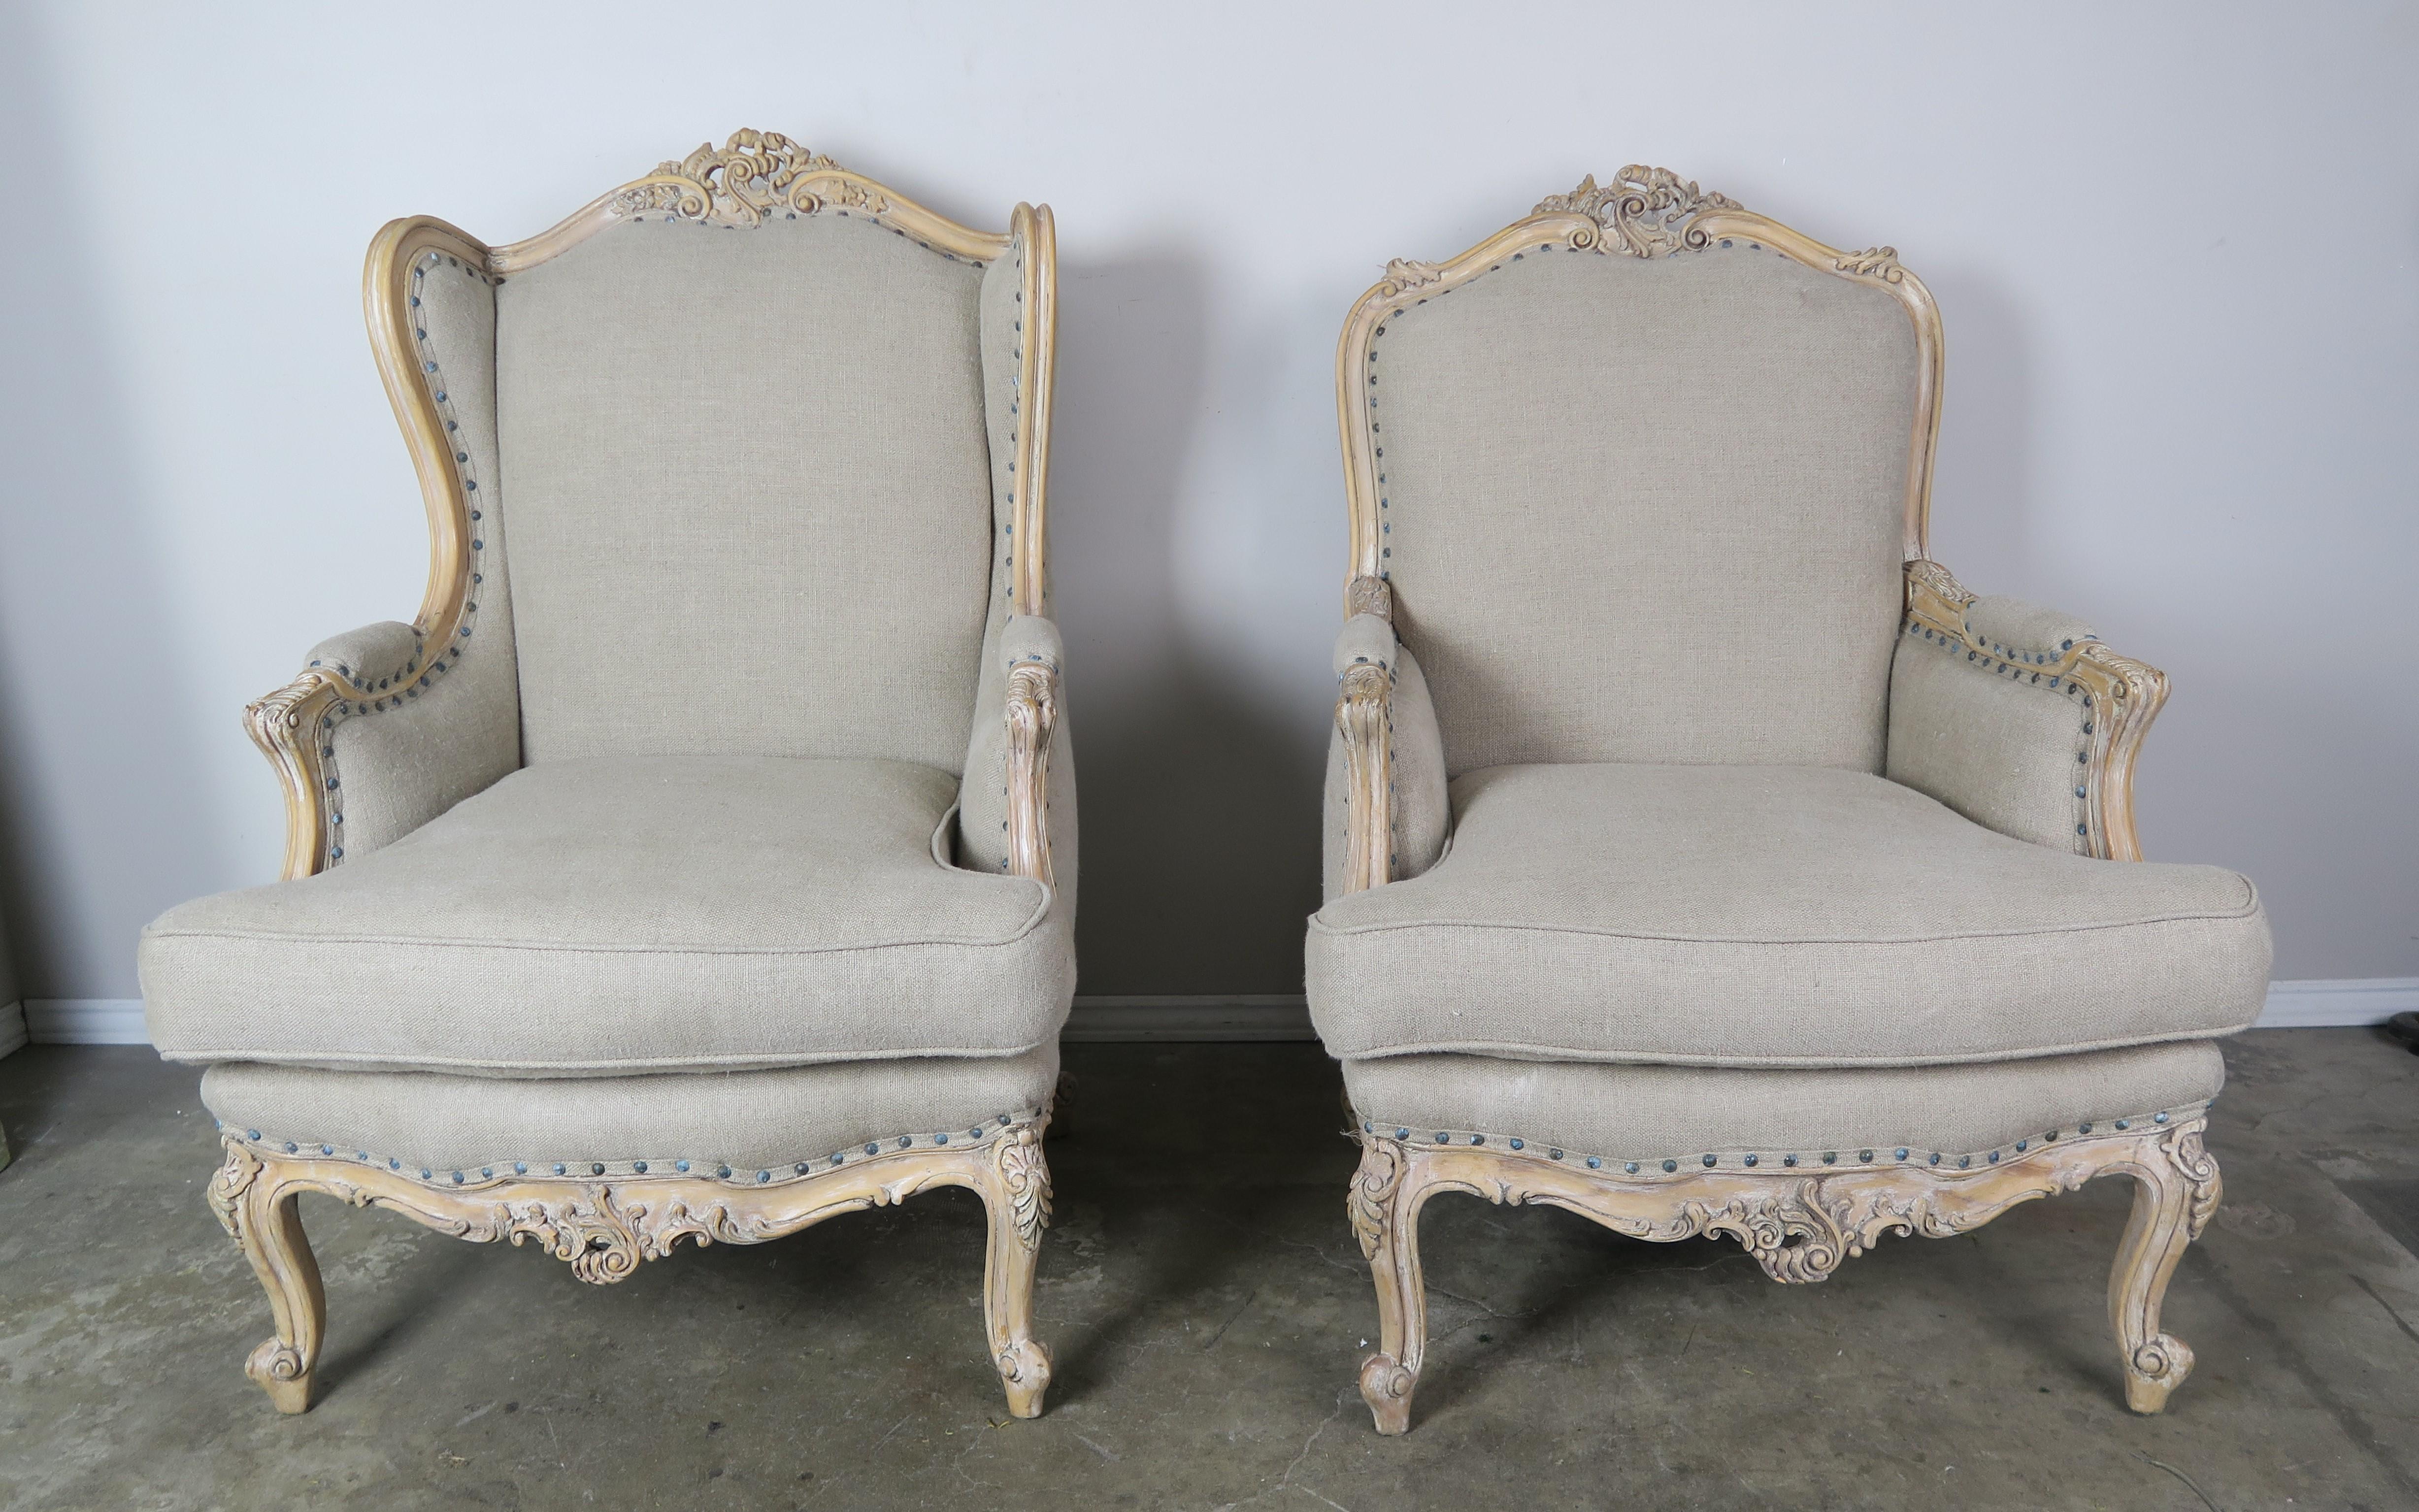 French Louis XV style carved wood armchairs, one with wings and one without. The armchairs stand on four cabriole shaped legs that end in rams head feet. The natural finished walnut armchairs are newly reupholstered in a washed Belgium linen with